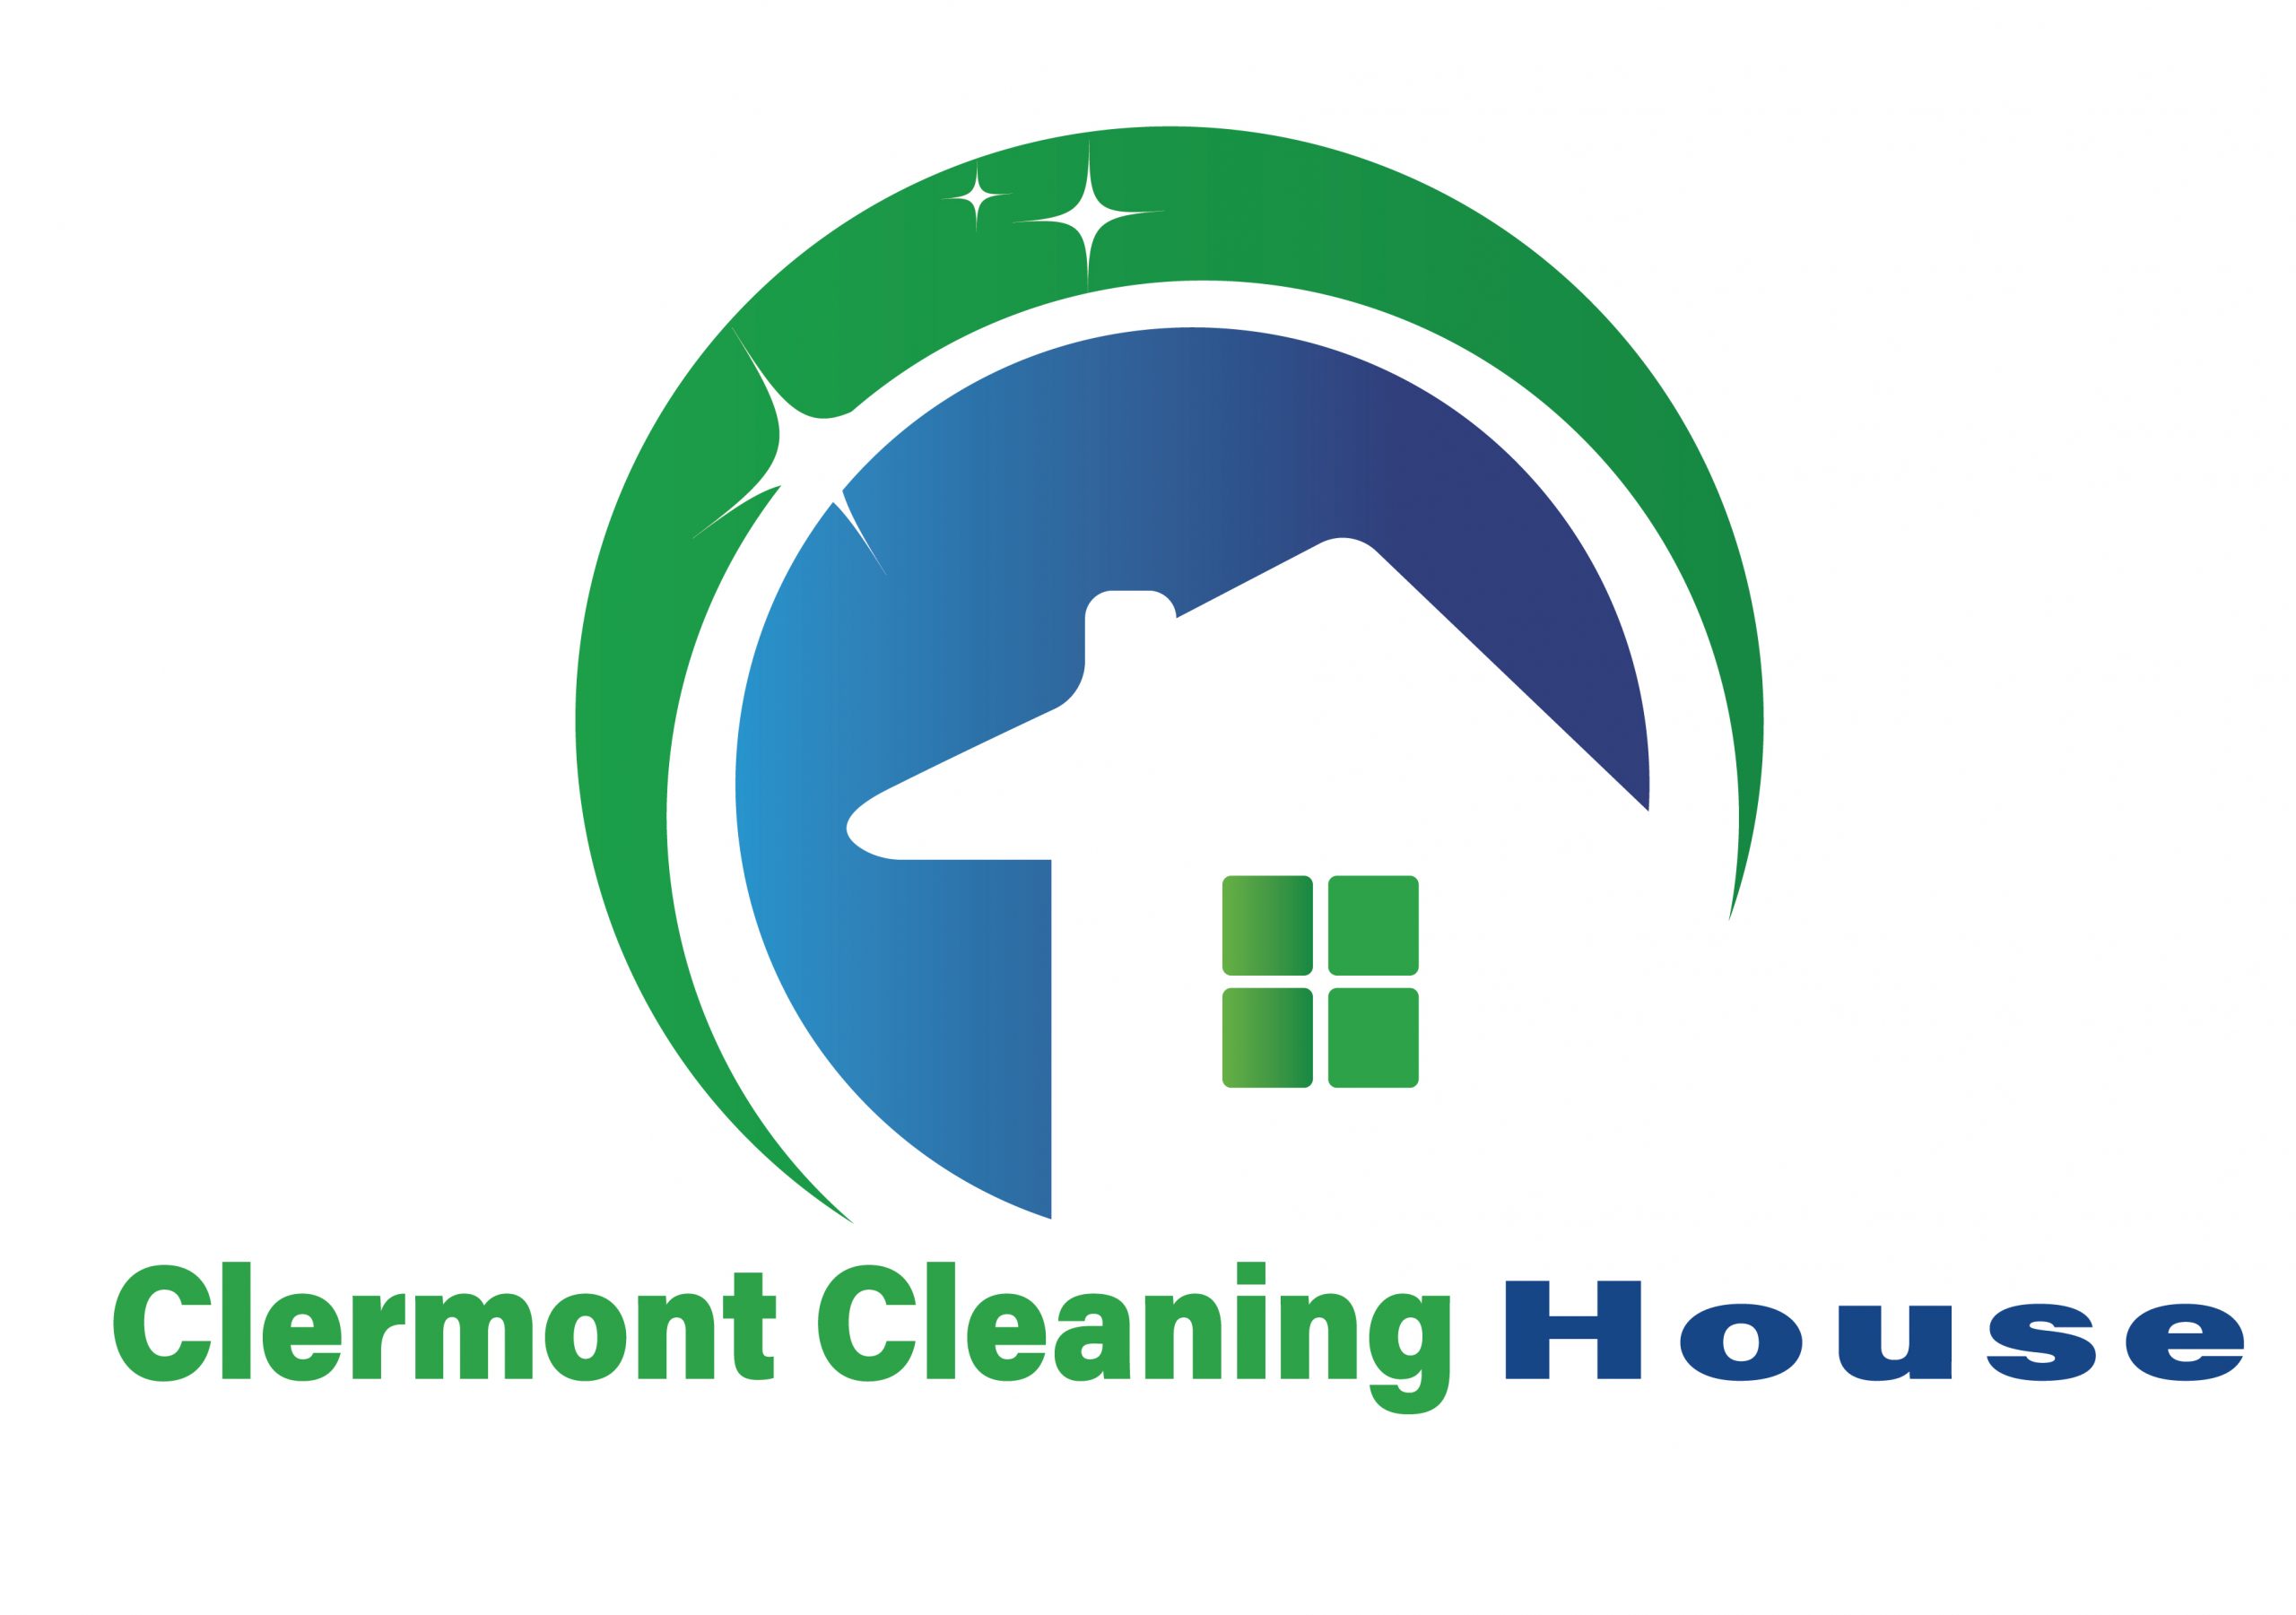 Clermont Cleaning House